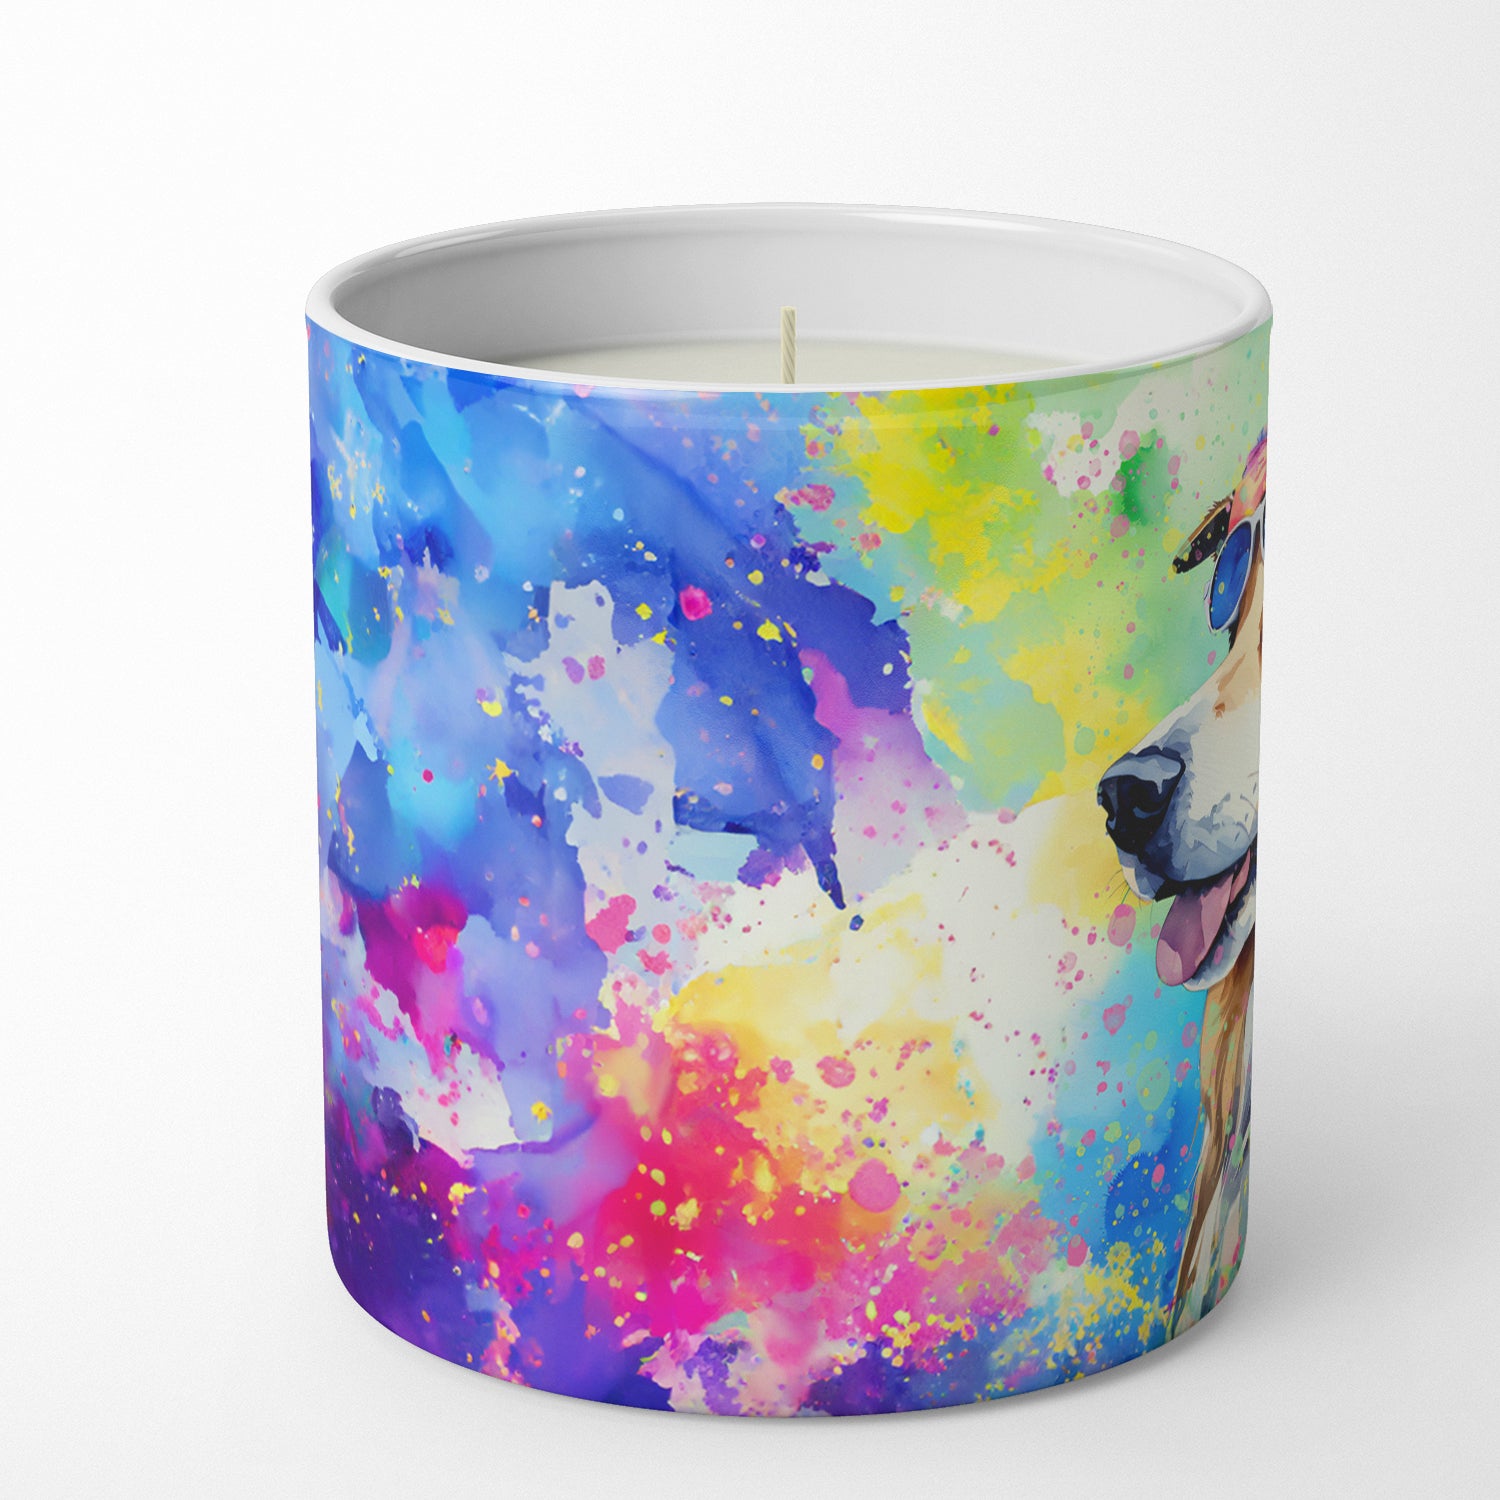 Collie Hippie Dawg Decorative Soy Candle